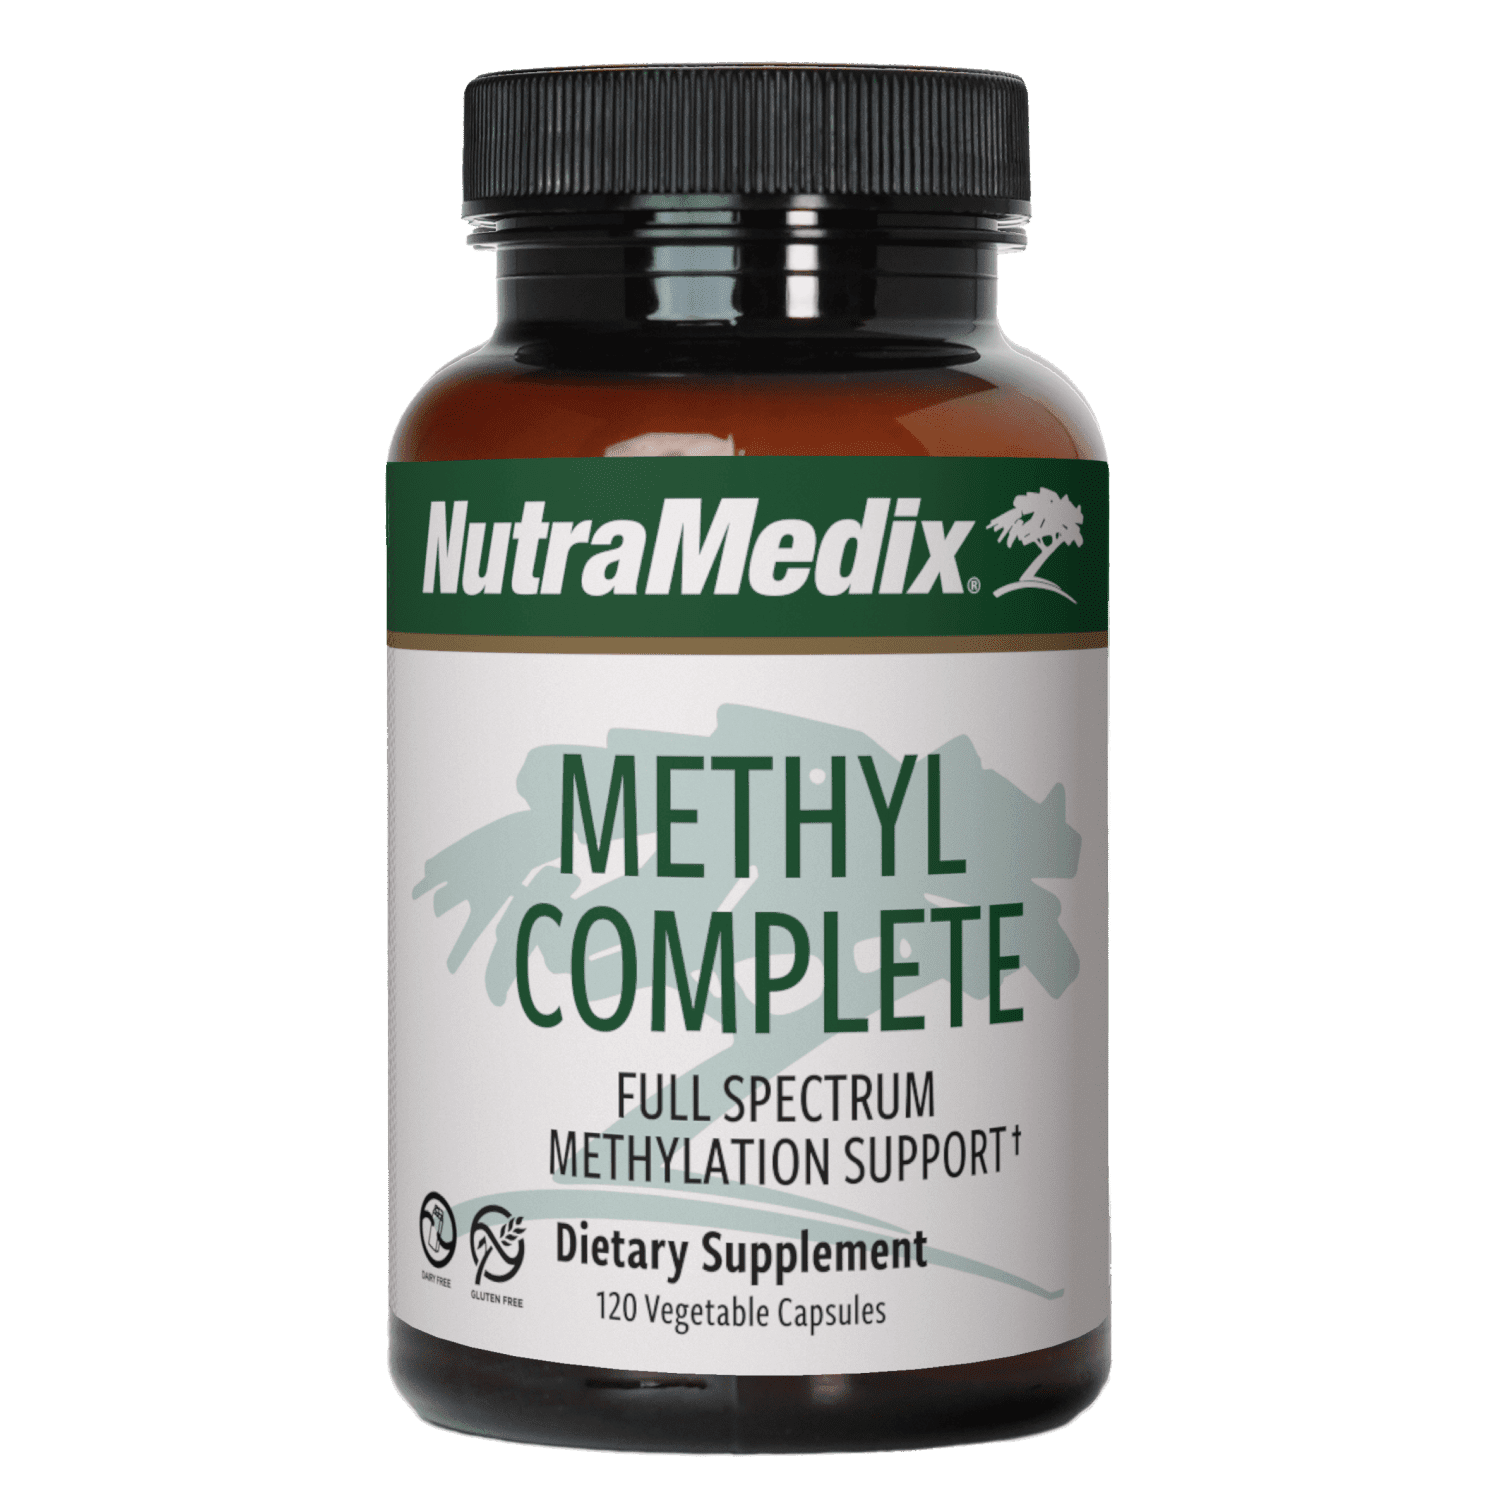 The Neutralizer – 60 Day Comprehensive Cleanse